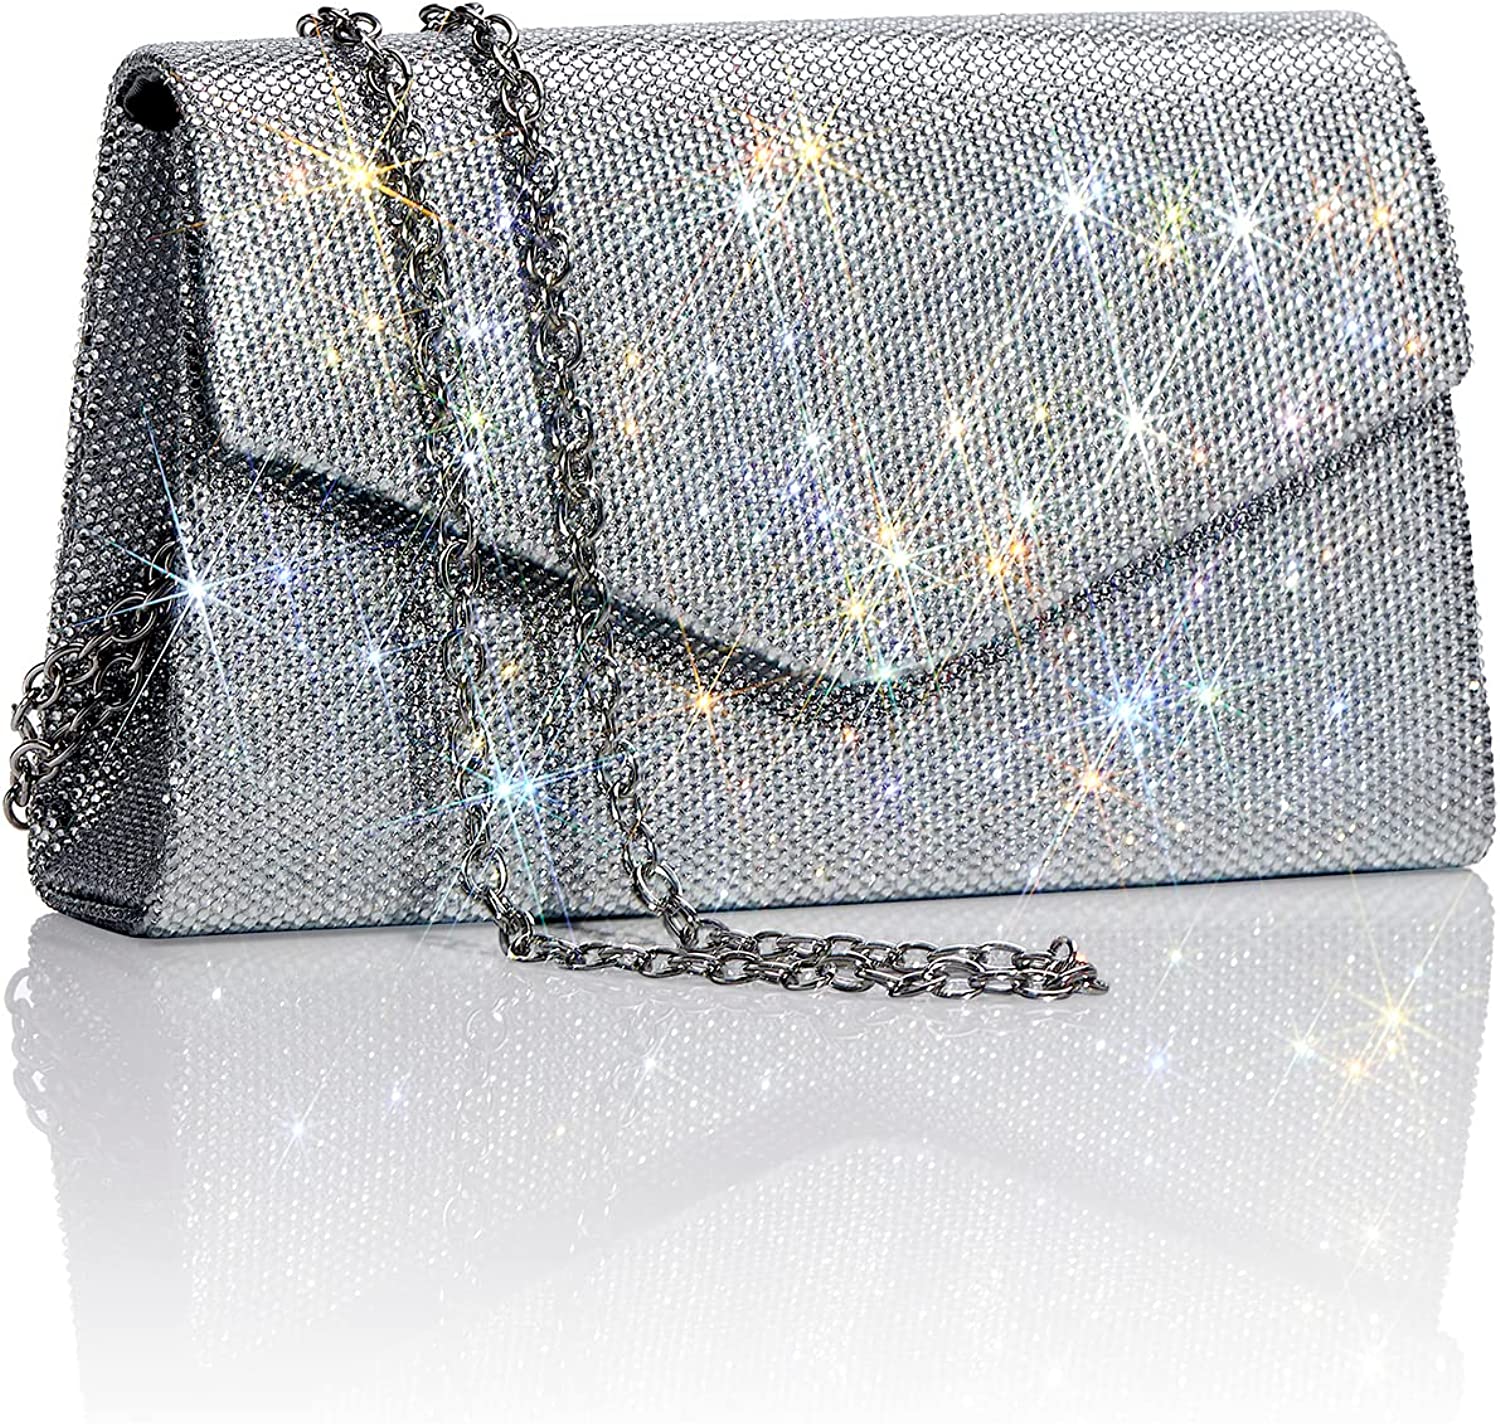 634 Clutch Purse Glitter Royalty-Free Photos and Stock Images | Shutterstock